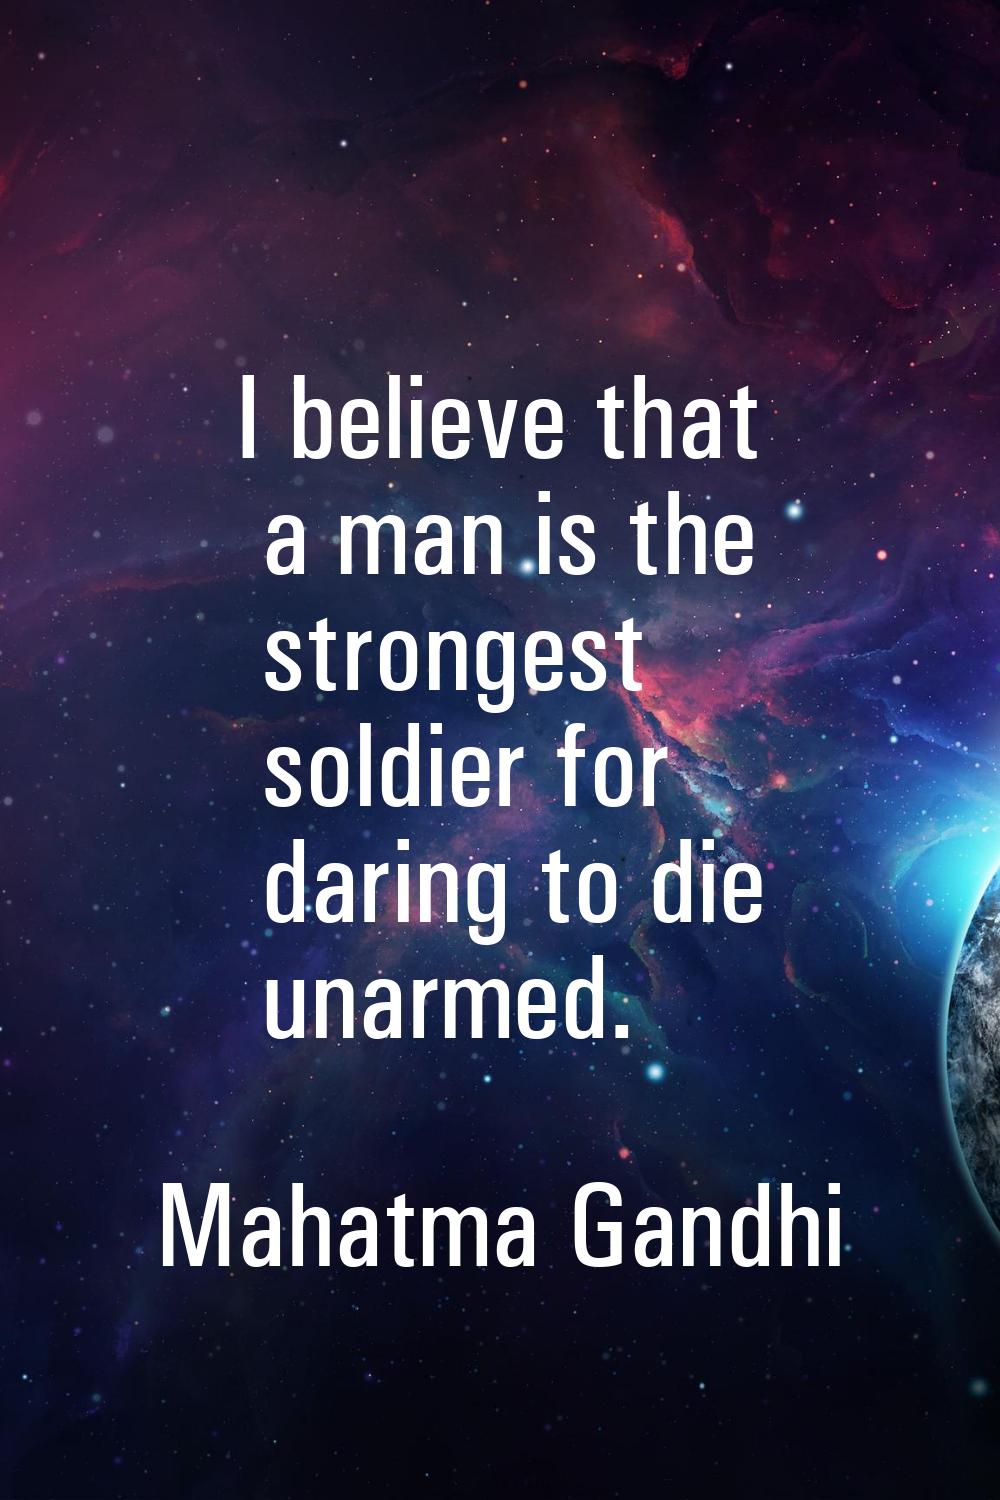 I believe that a man is the strongest soldier for daring to die unarmed.